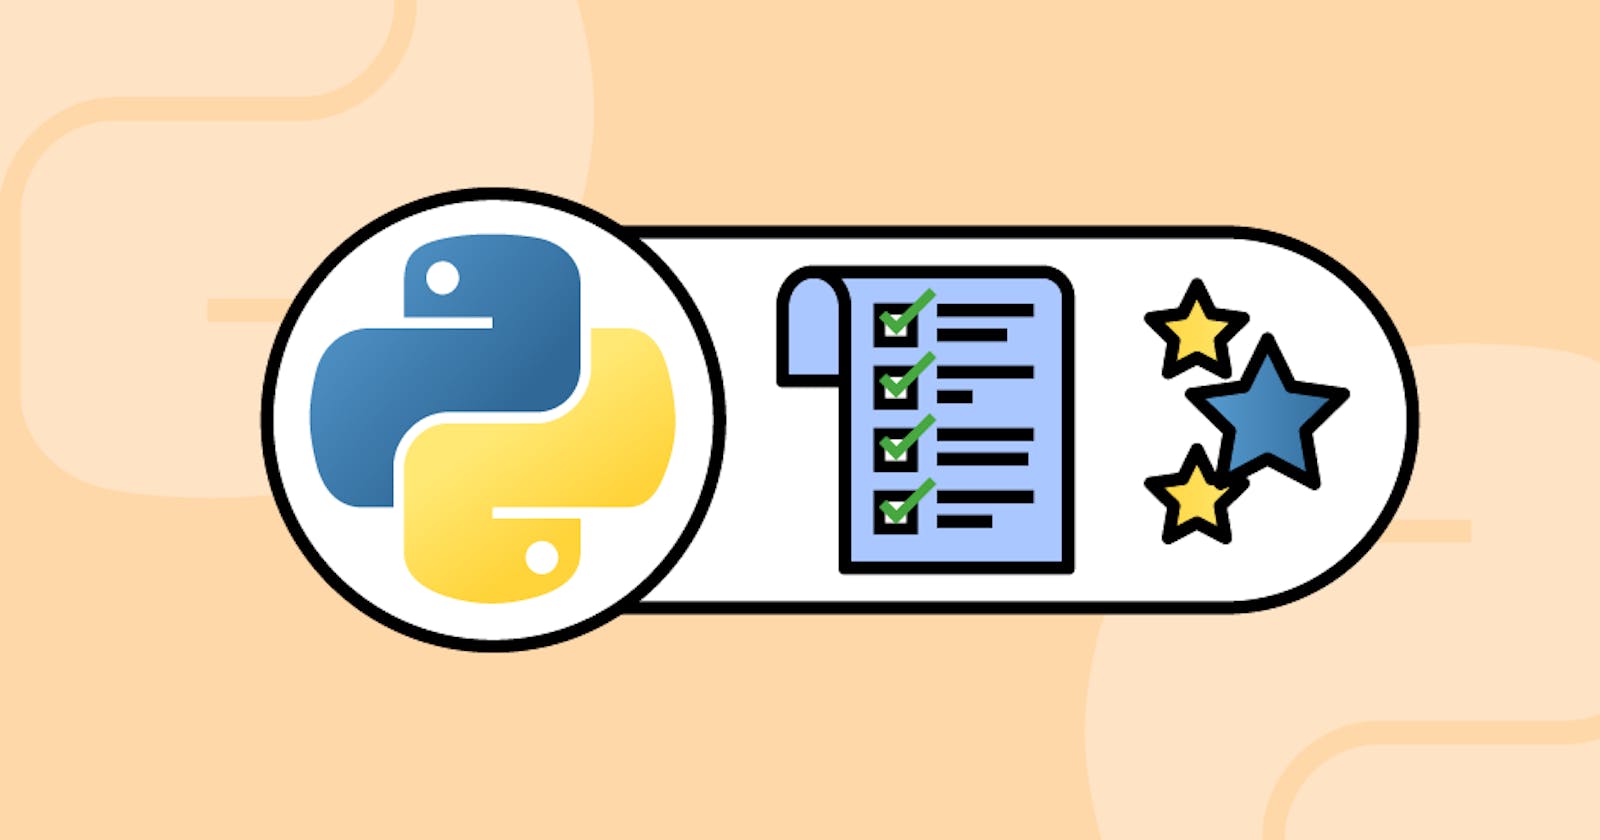 What can you do with Python? 5 real-world Python applications